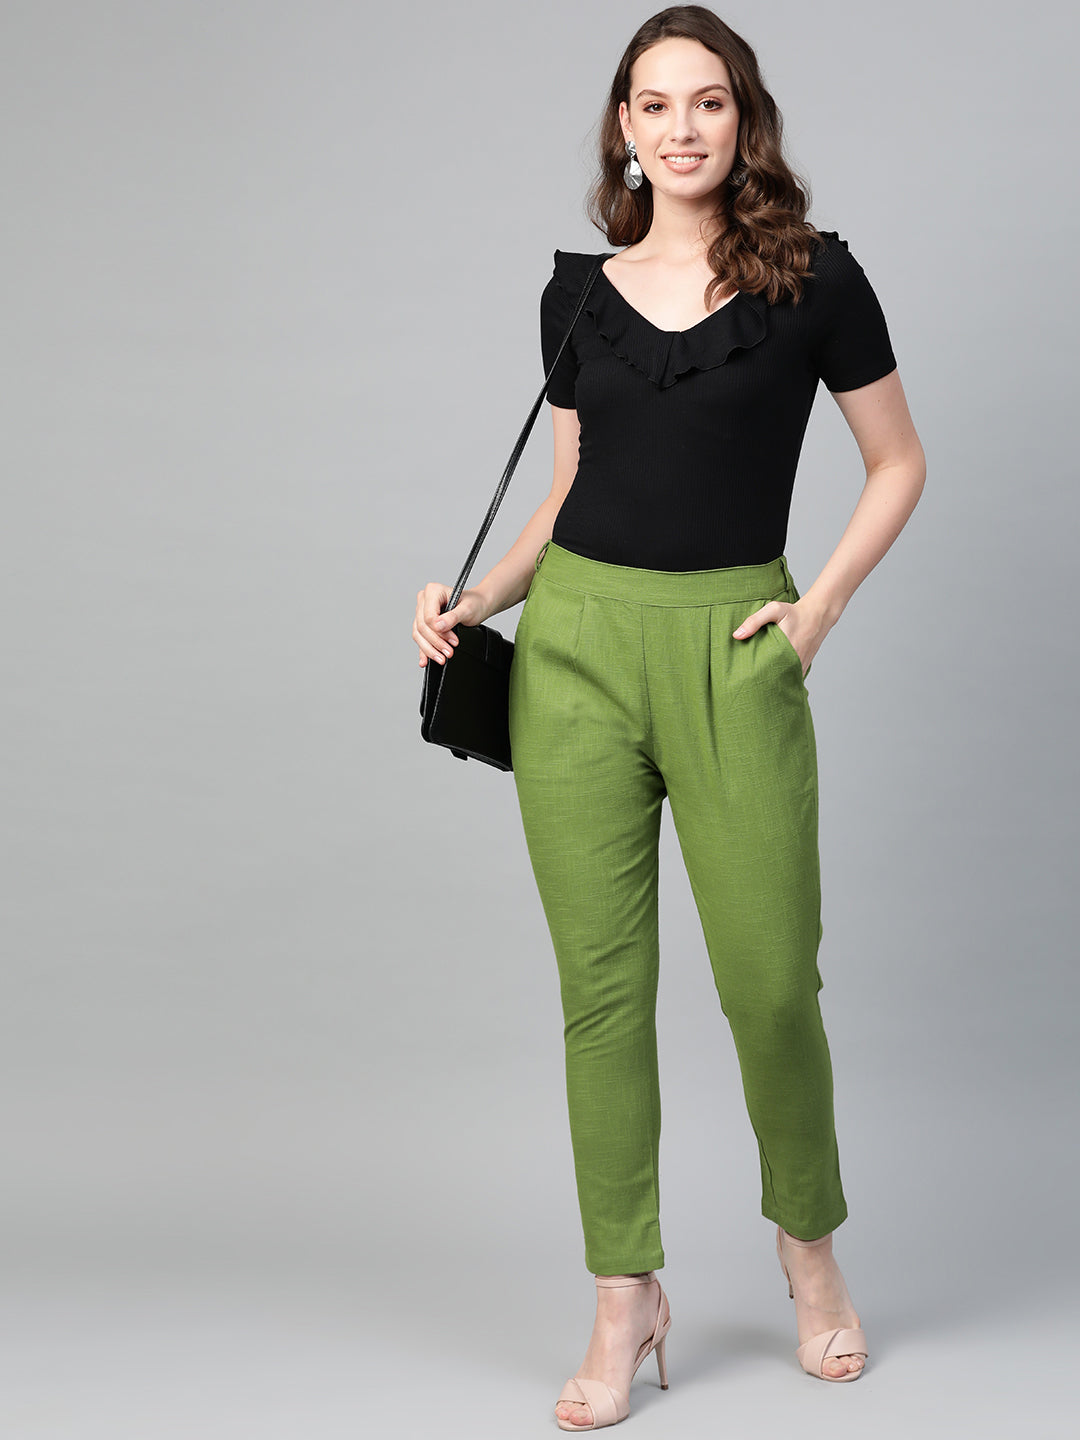 Buy Olive Green Trousers & Pants for Men by NETPLAY Online | Ajio.com